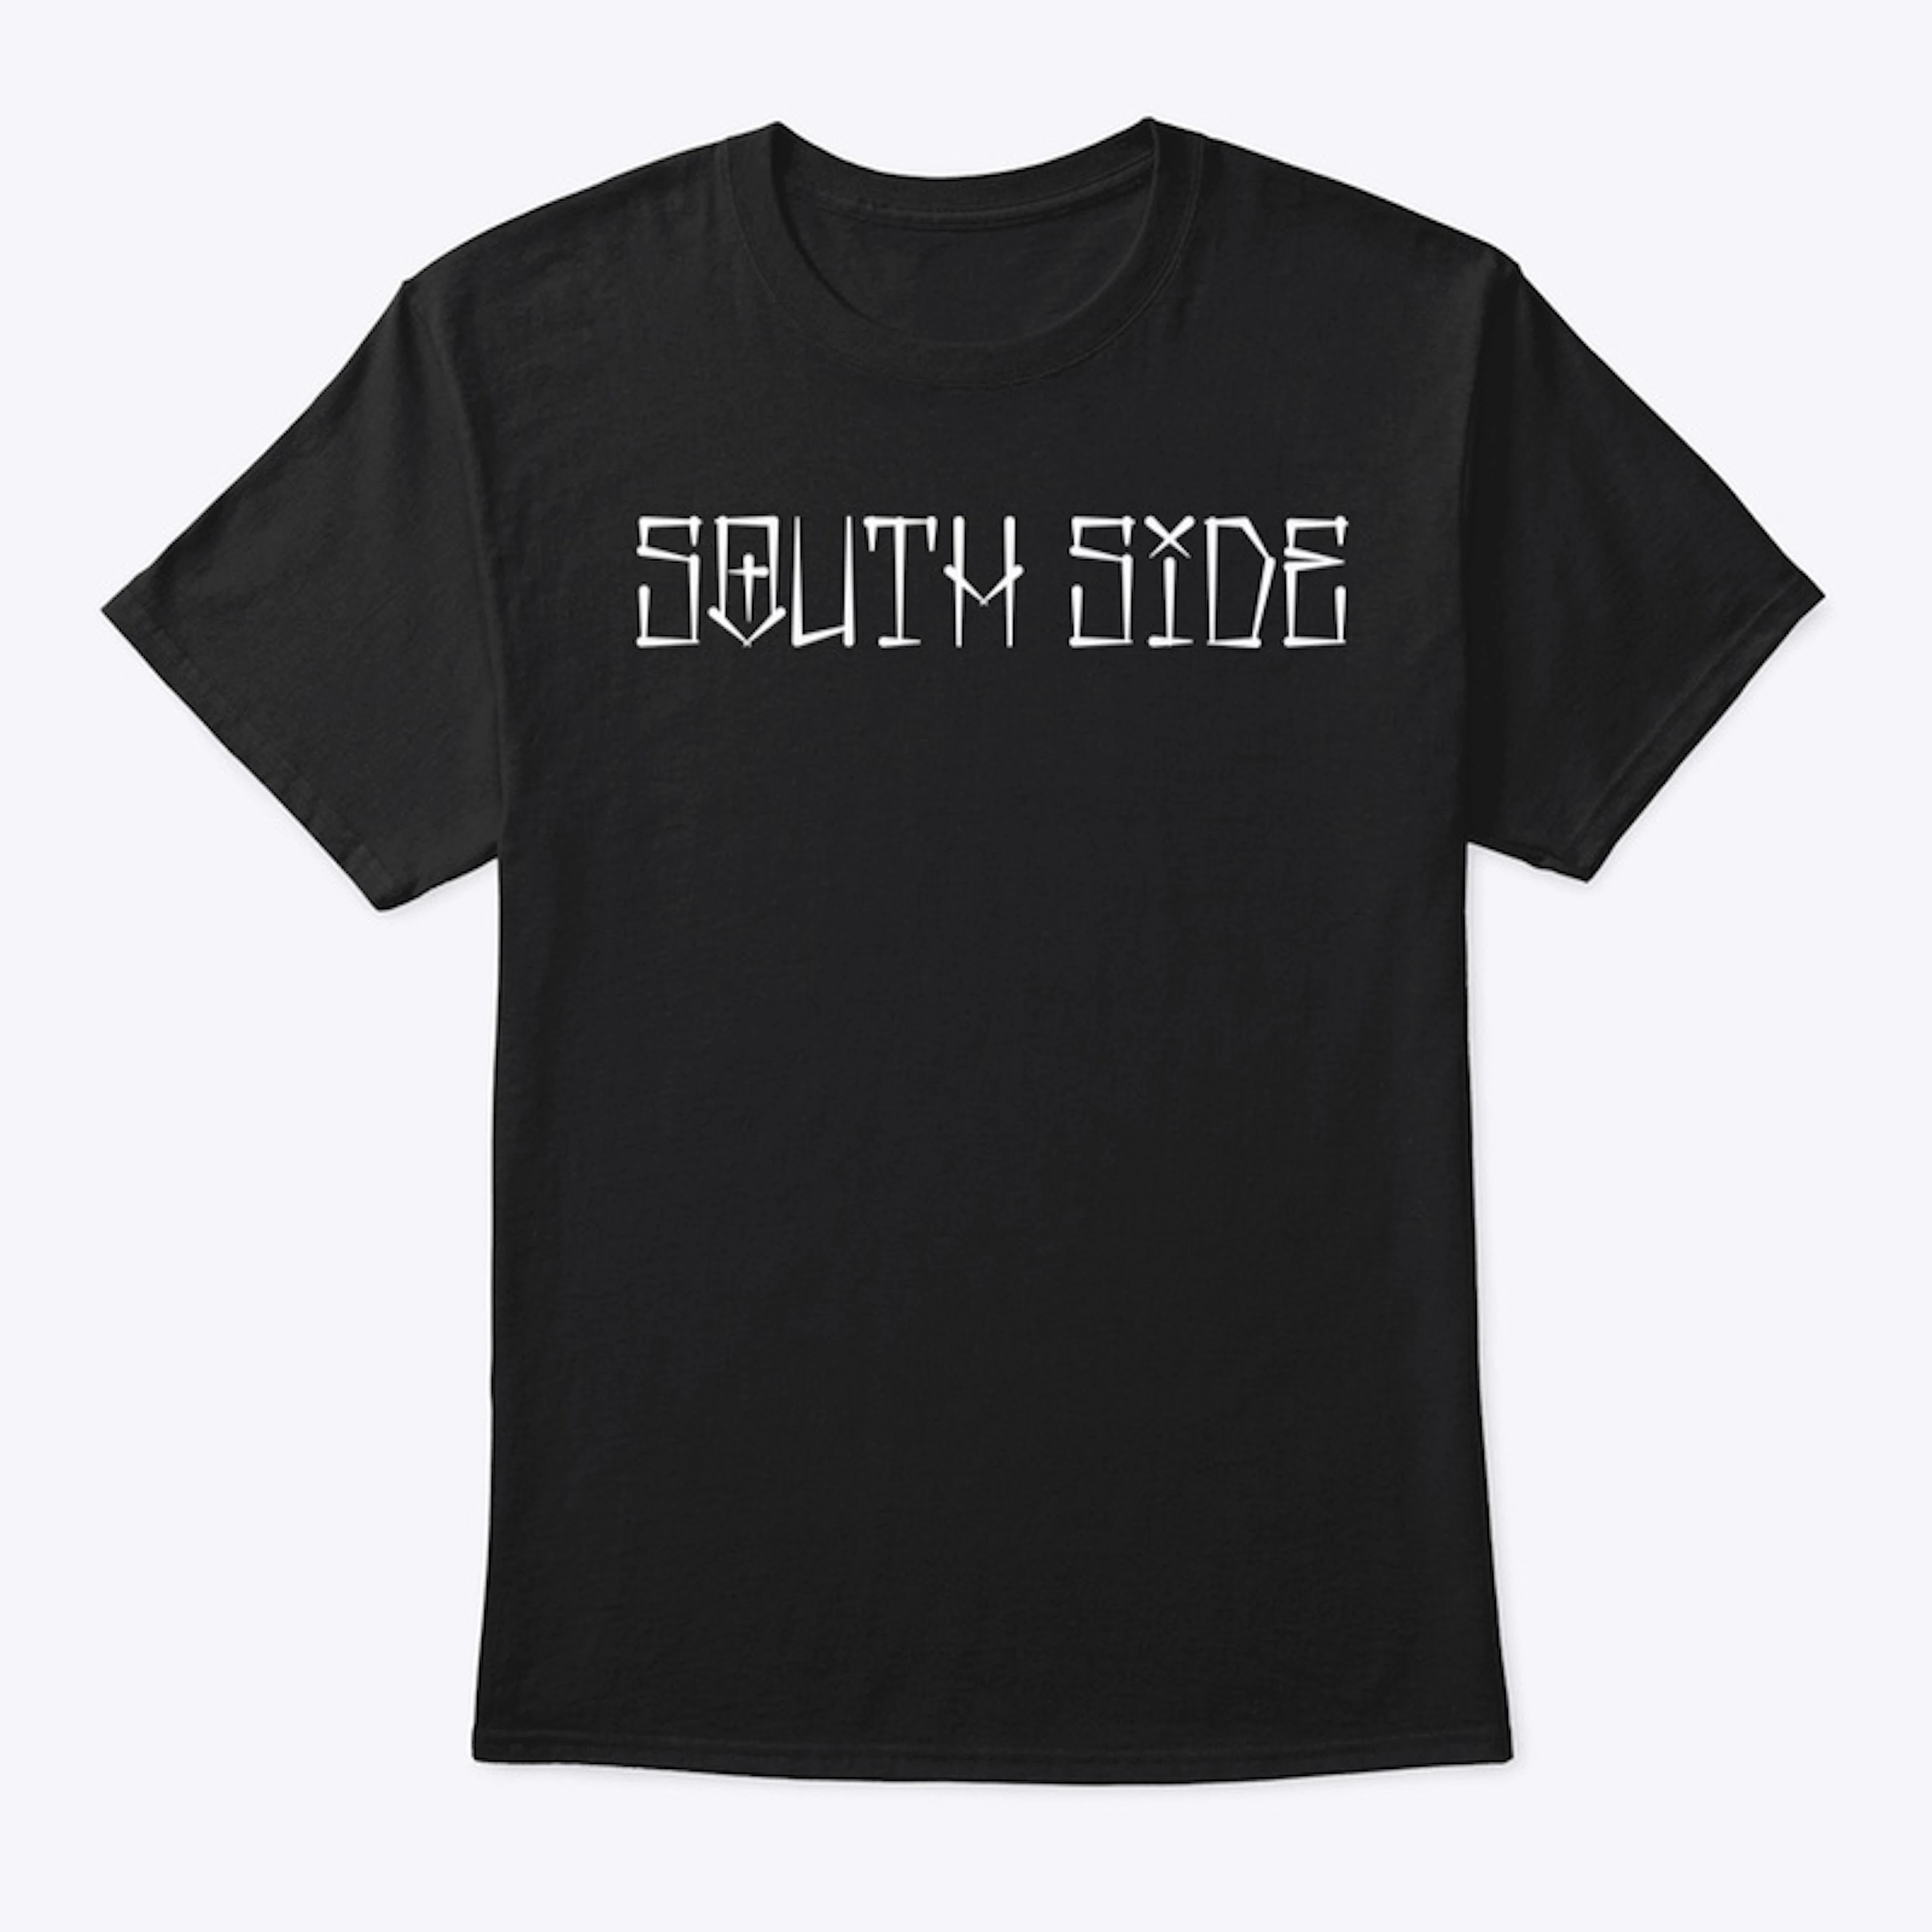 South Side T-Shirt